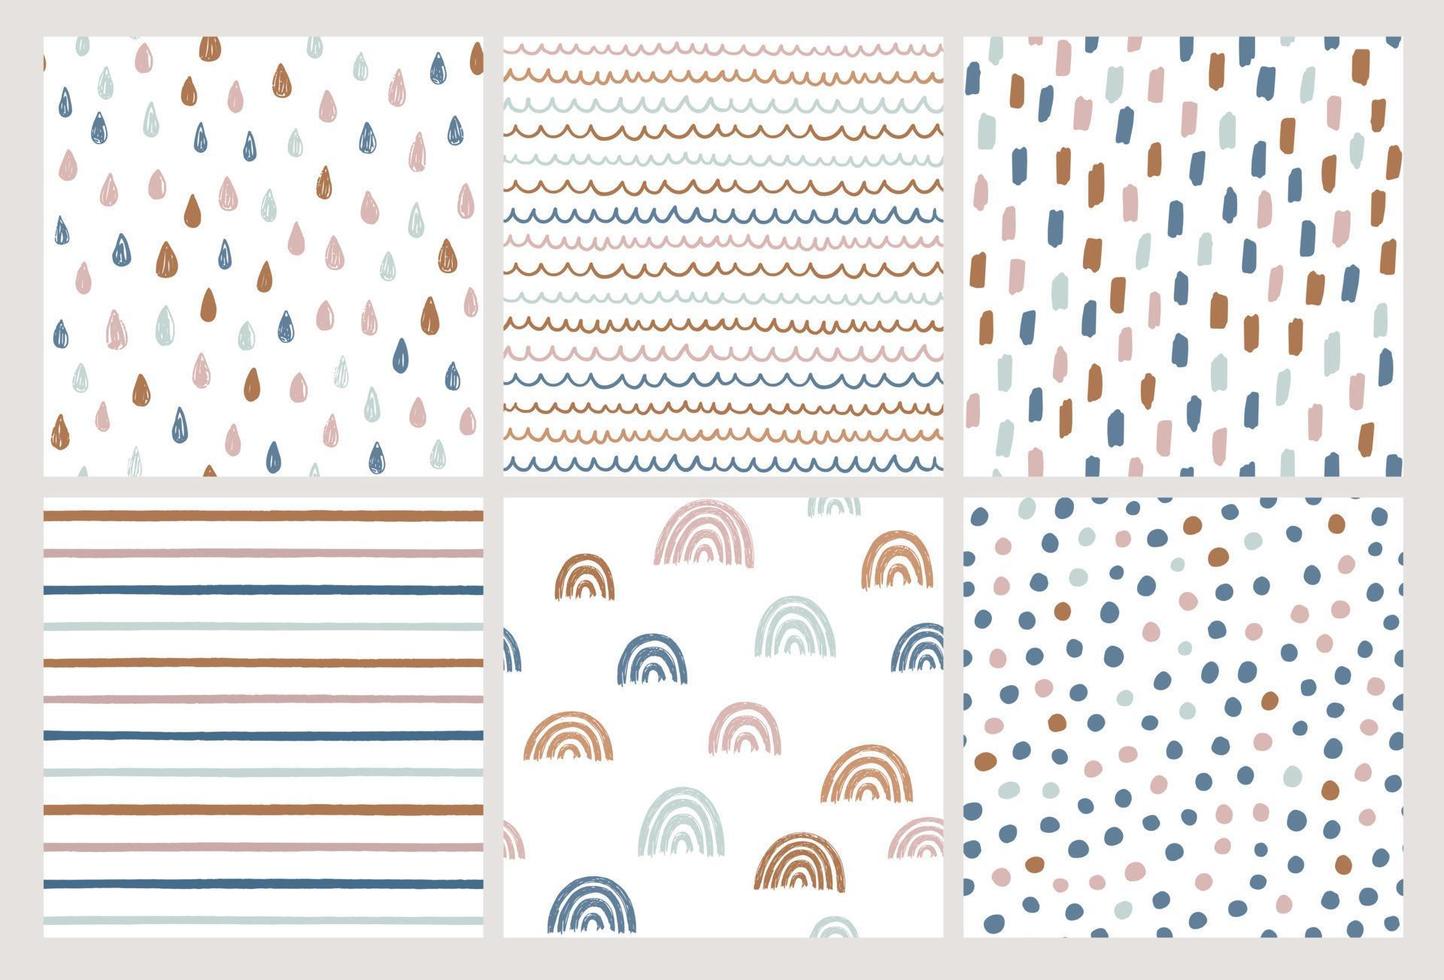 Set of hand drawn vector patterns in trendy colors. Doodles made with ink. Rainbow, stripes, dots, rain drops, brush strokes. Seamless geometric backgrounds.